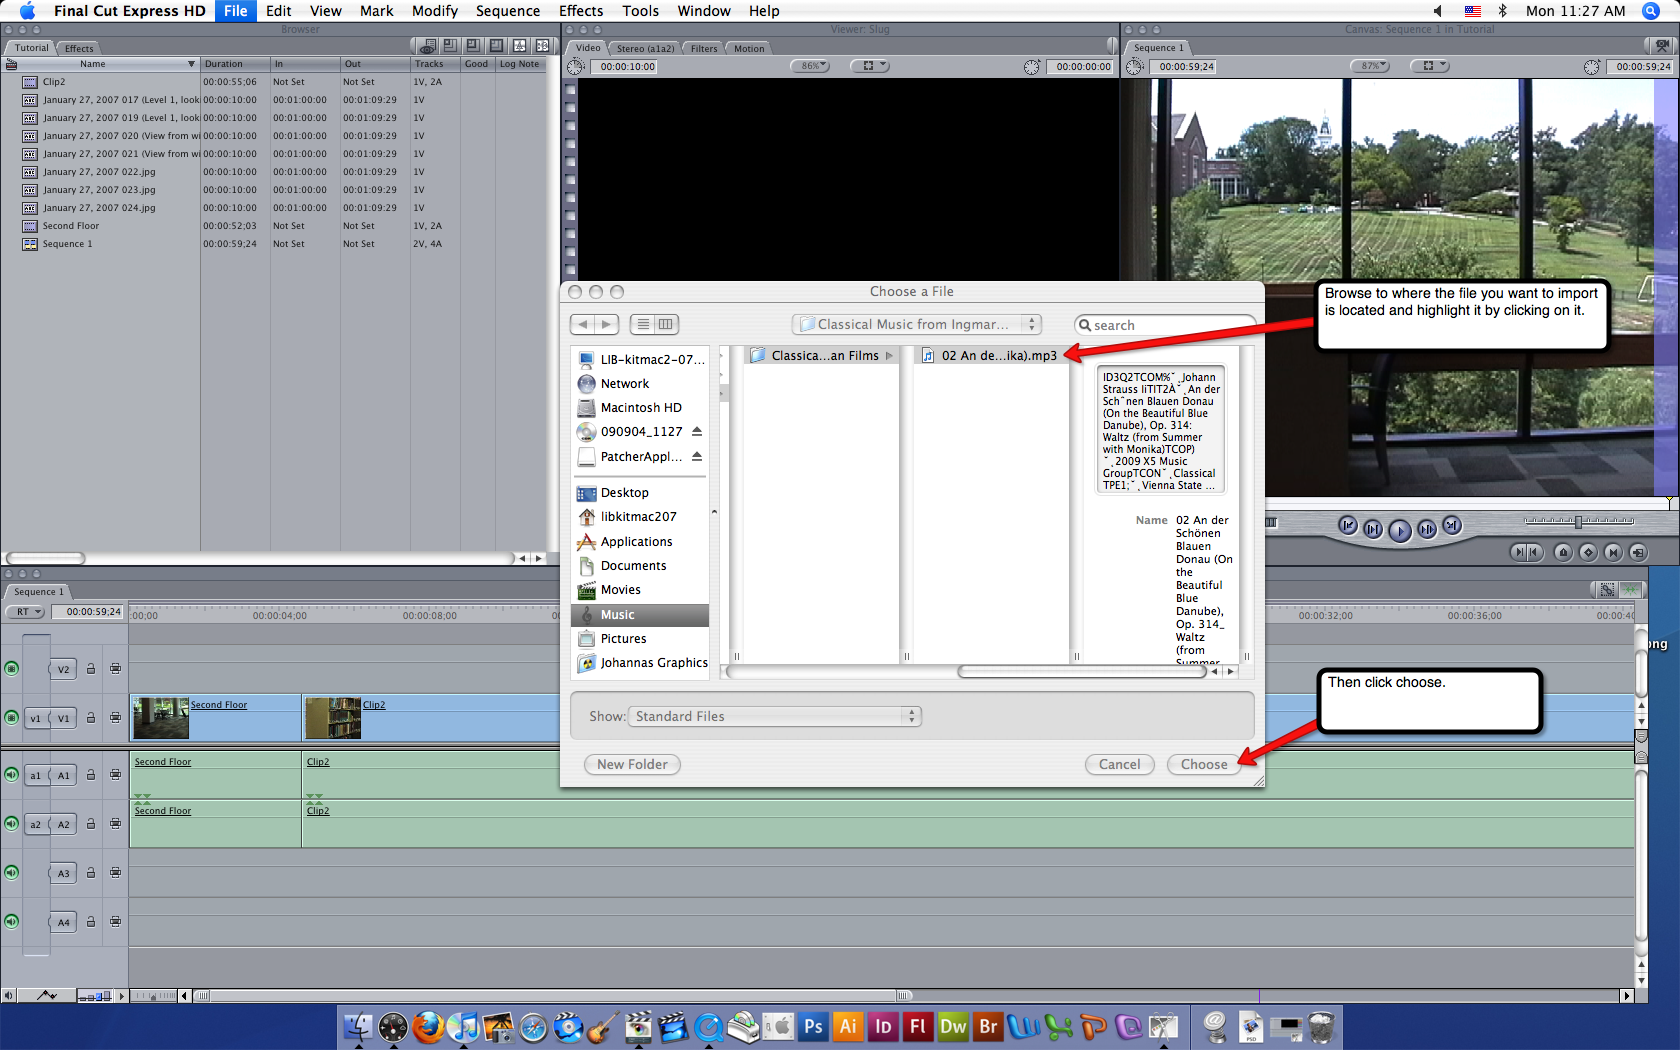 Visual guide to adding photos in Final Cut Express HD step 2.